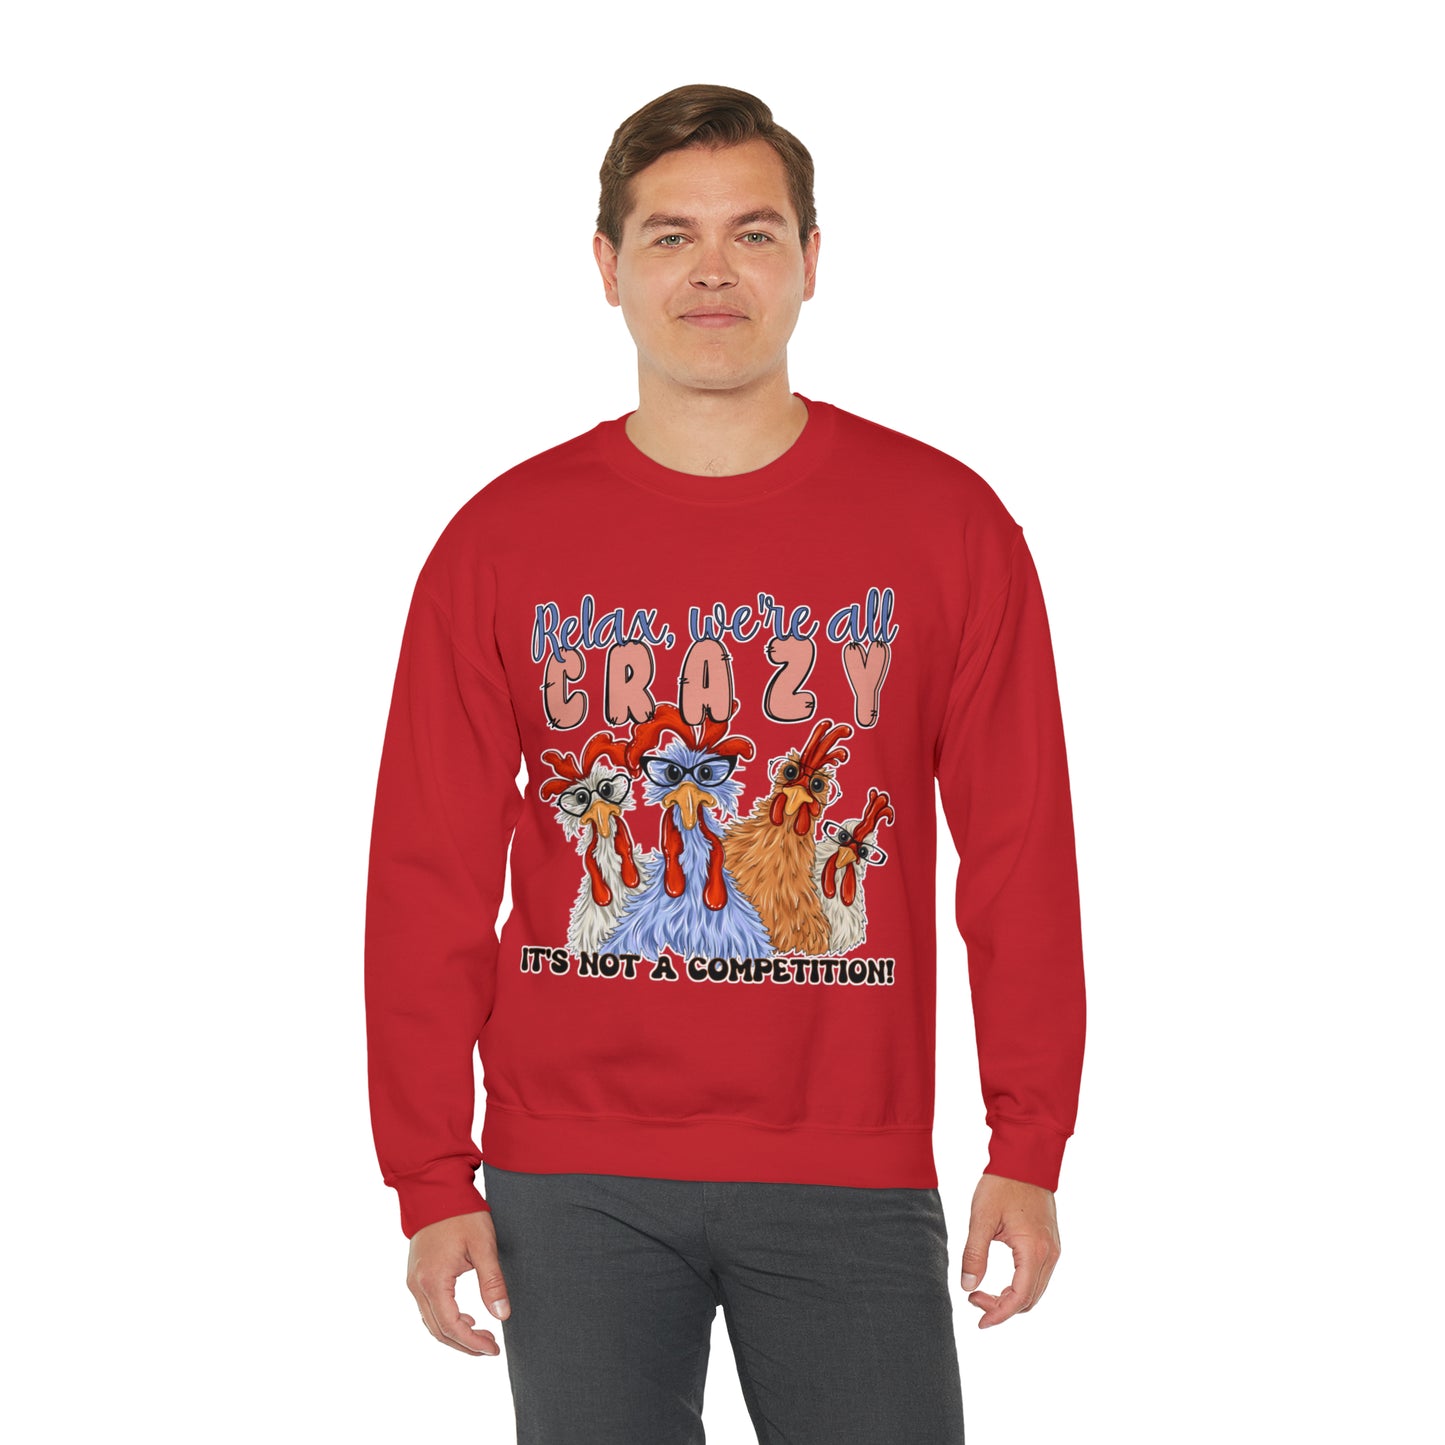 Relax, We're All Crazy, It's Not A Competition: Unisex Heavy Blend™ Crewneck Sweatshirt